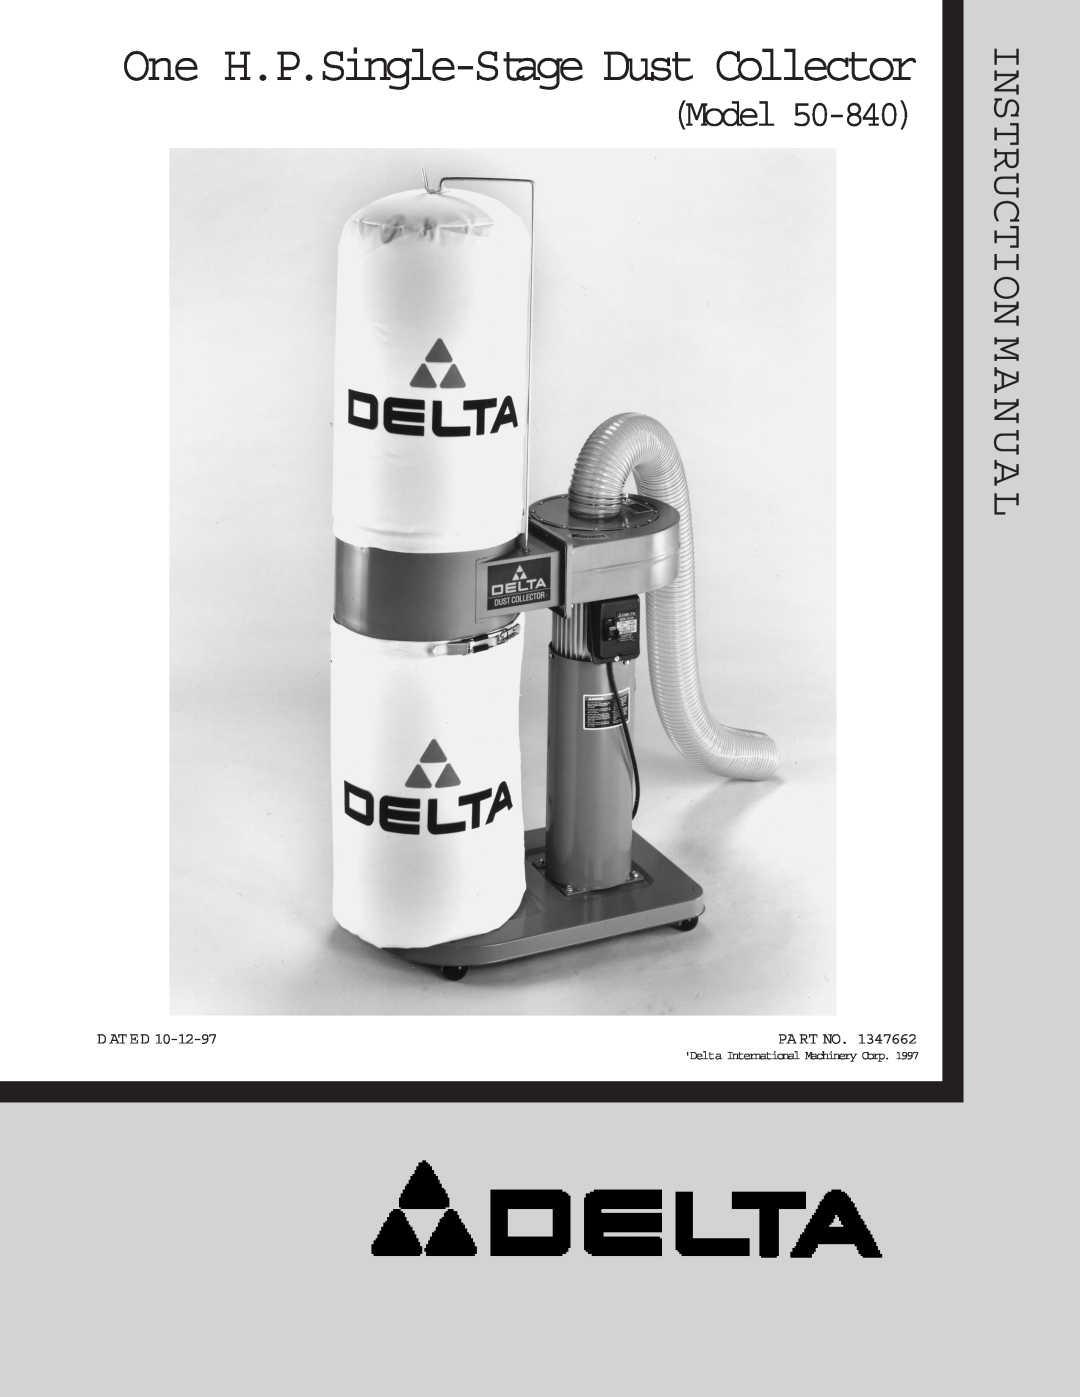 Delta 50-840 instruction manual Instruction M A N U A L, One H.P.Single-Stage Dust Collector, Model 